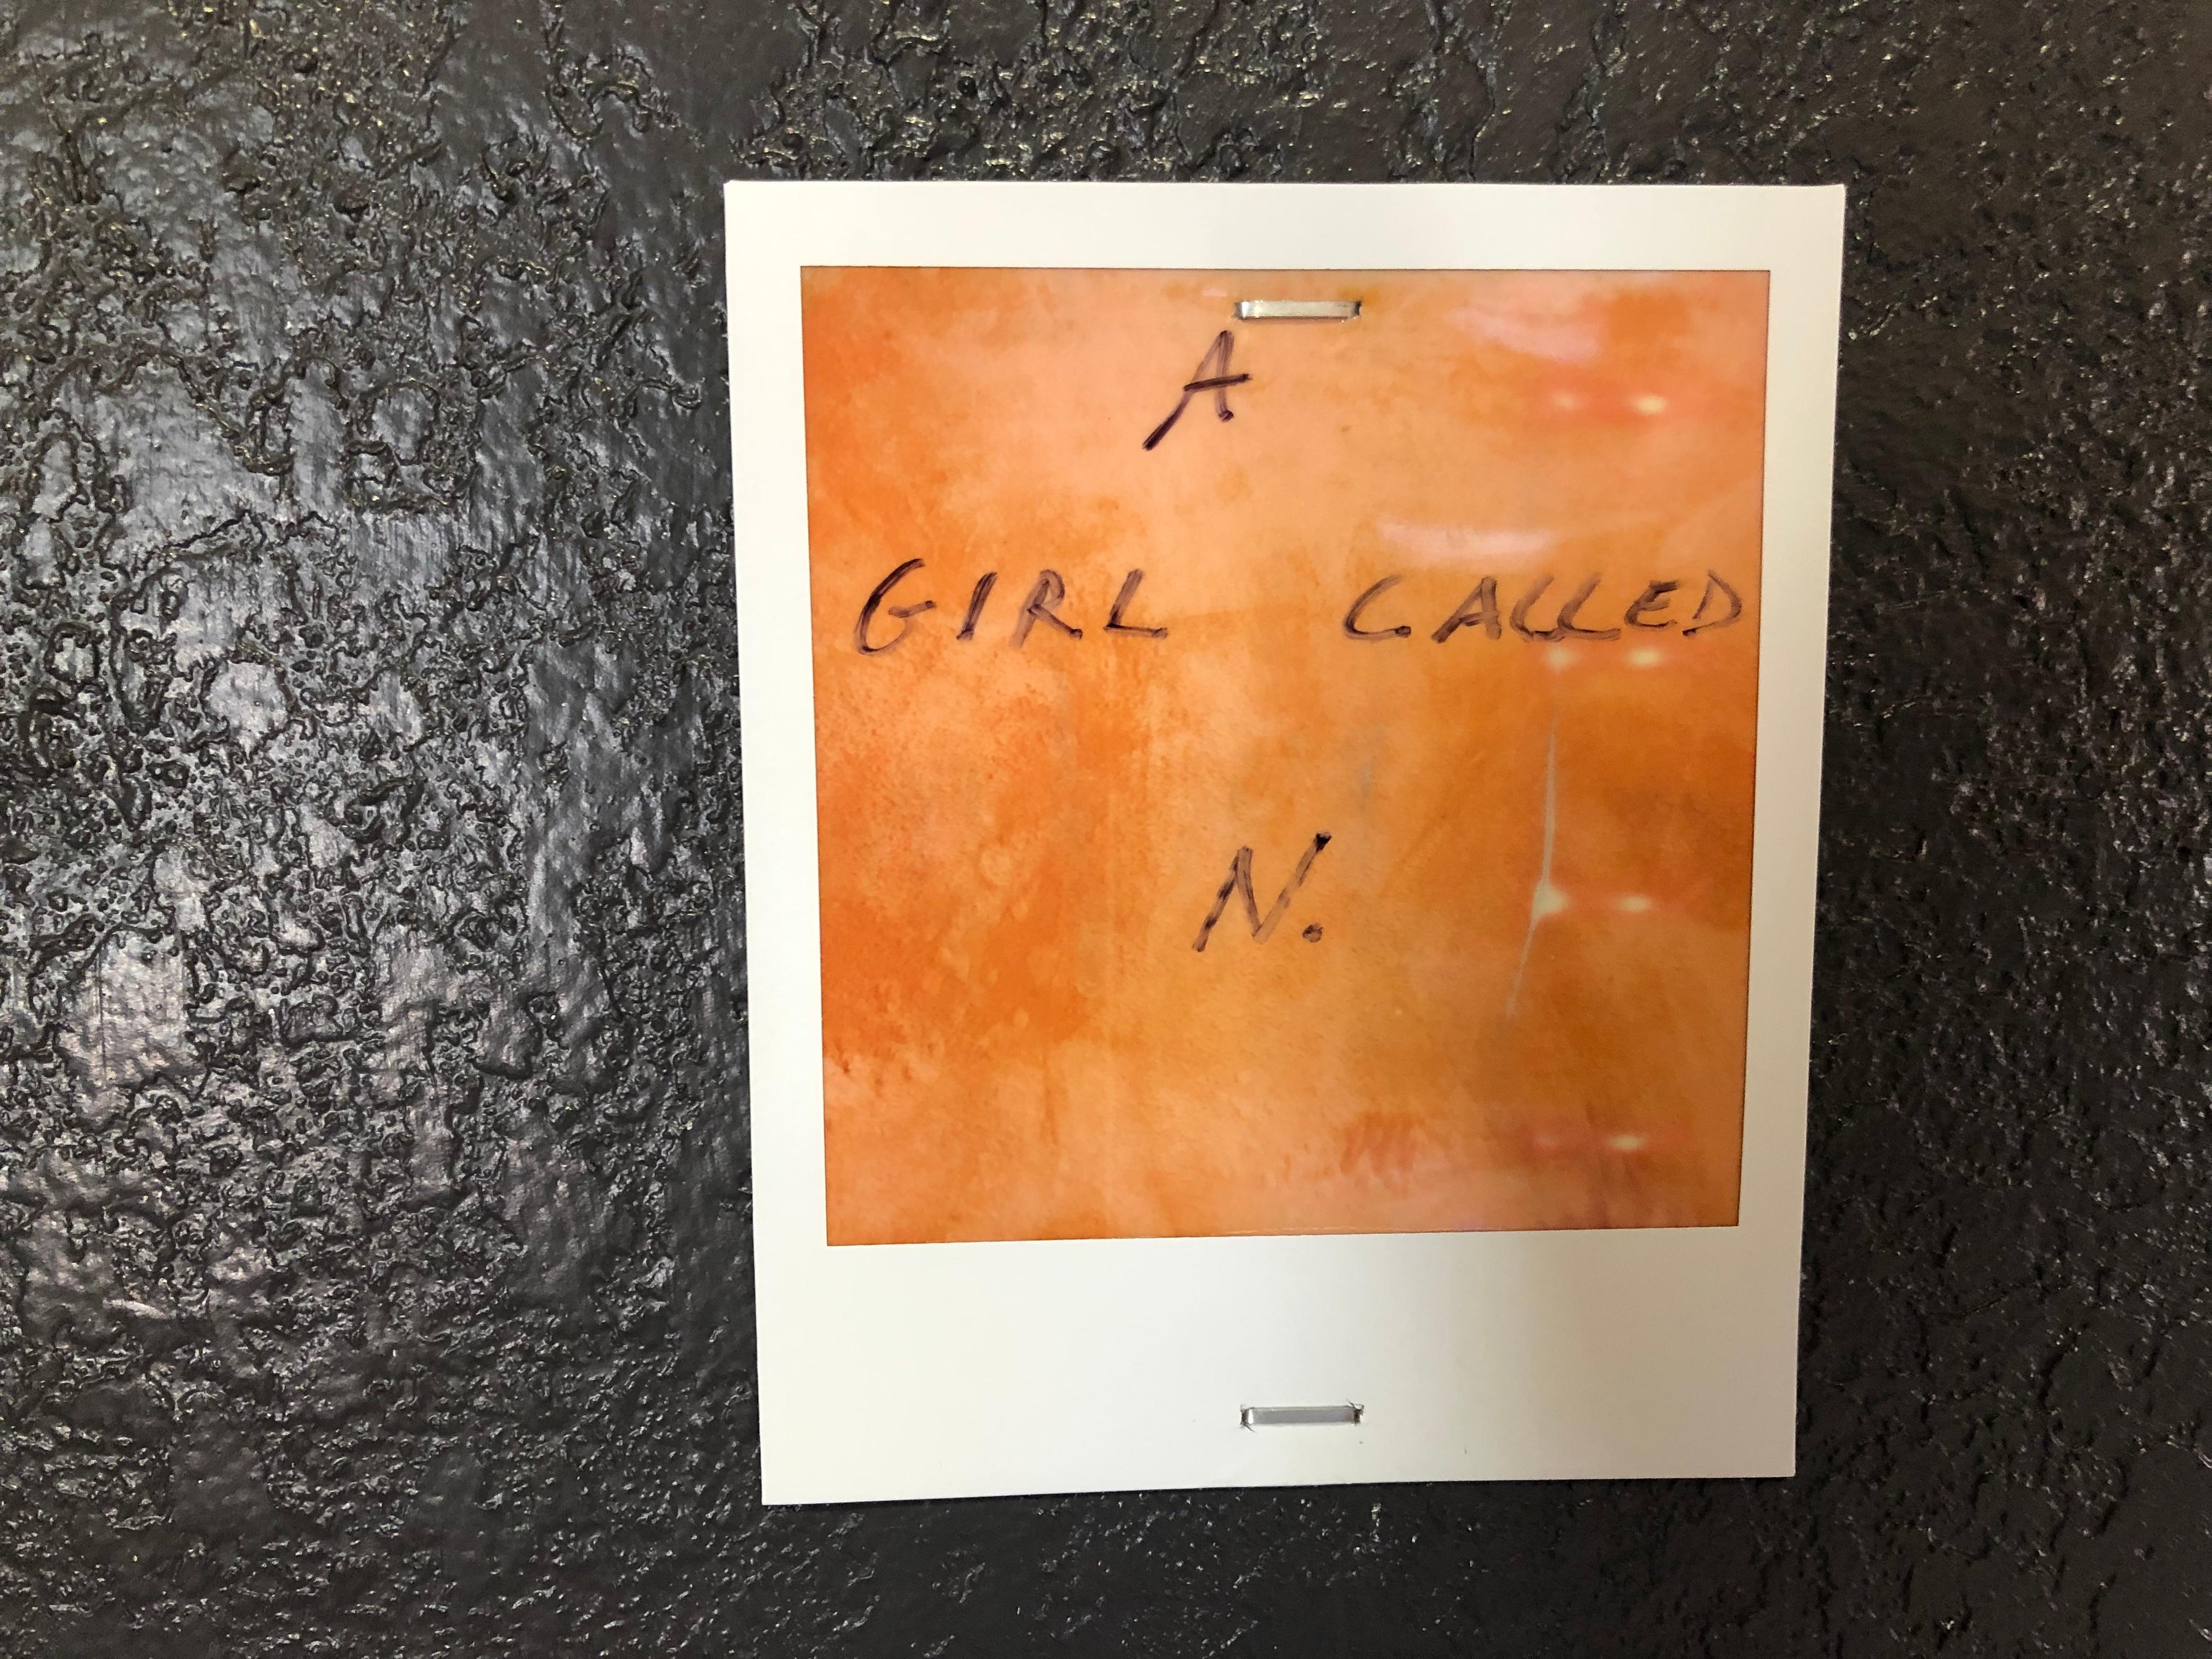 'Golden Brown' part of the series 'A girl called N.' - 2019

50x50cm, 
Edition of 7 plus 2 Artist Proofs, 
Archival C-Print based on the Polaroid, 
Not mounted. Signed on the back and with certificate. Artist inventory PL2017-198.

This piece is